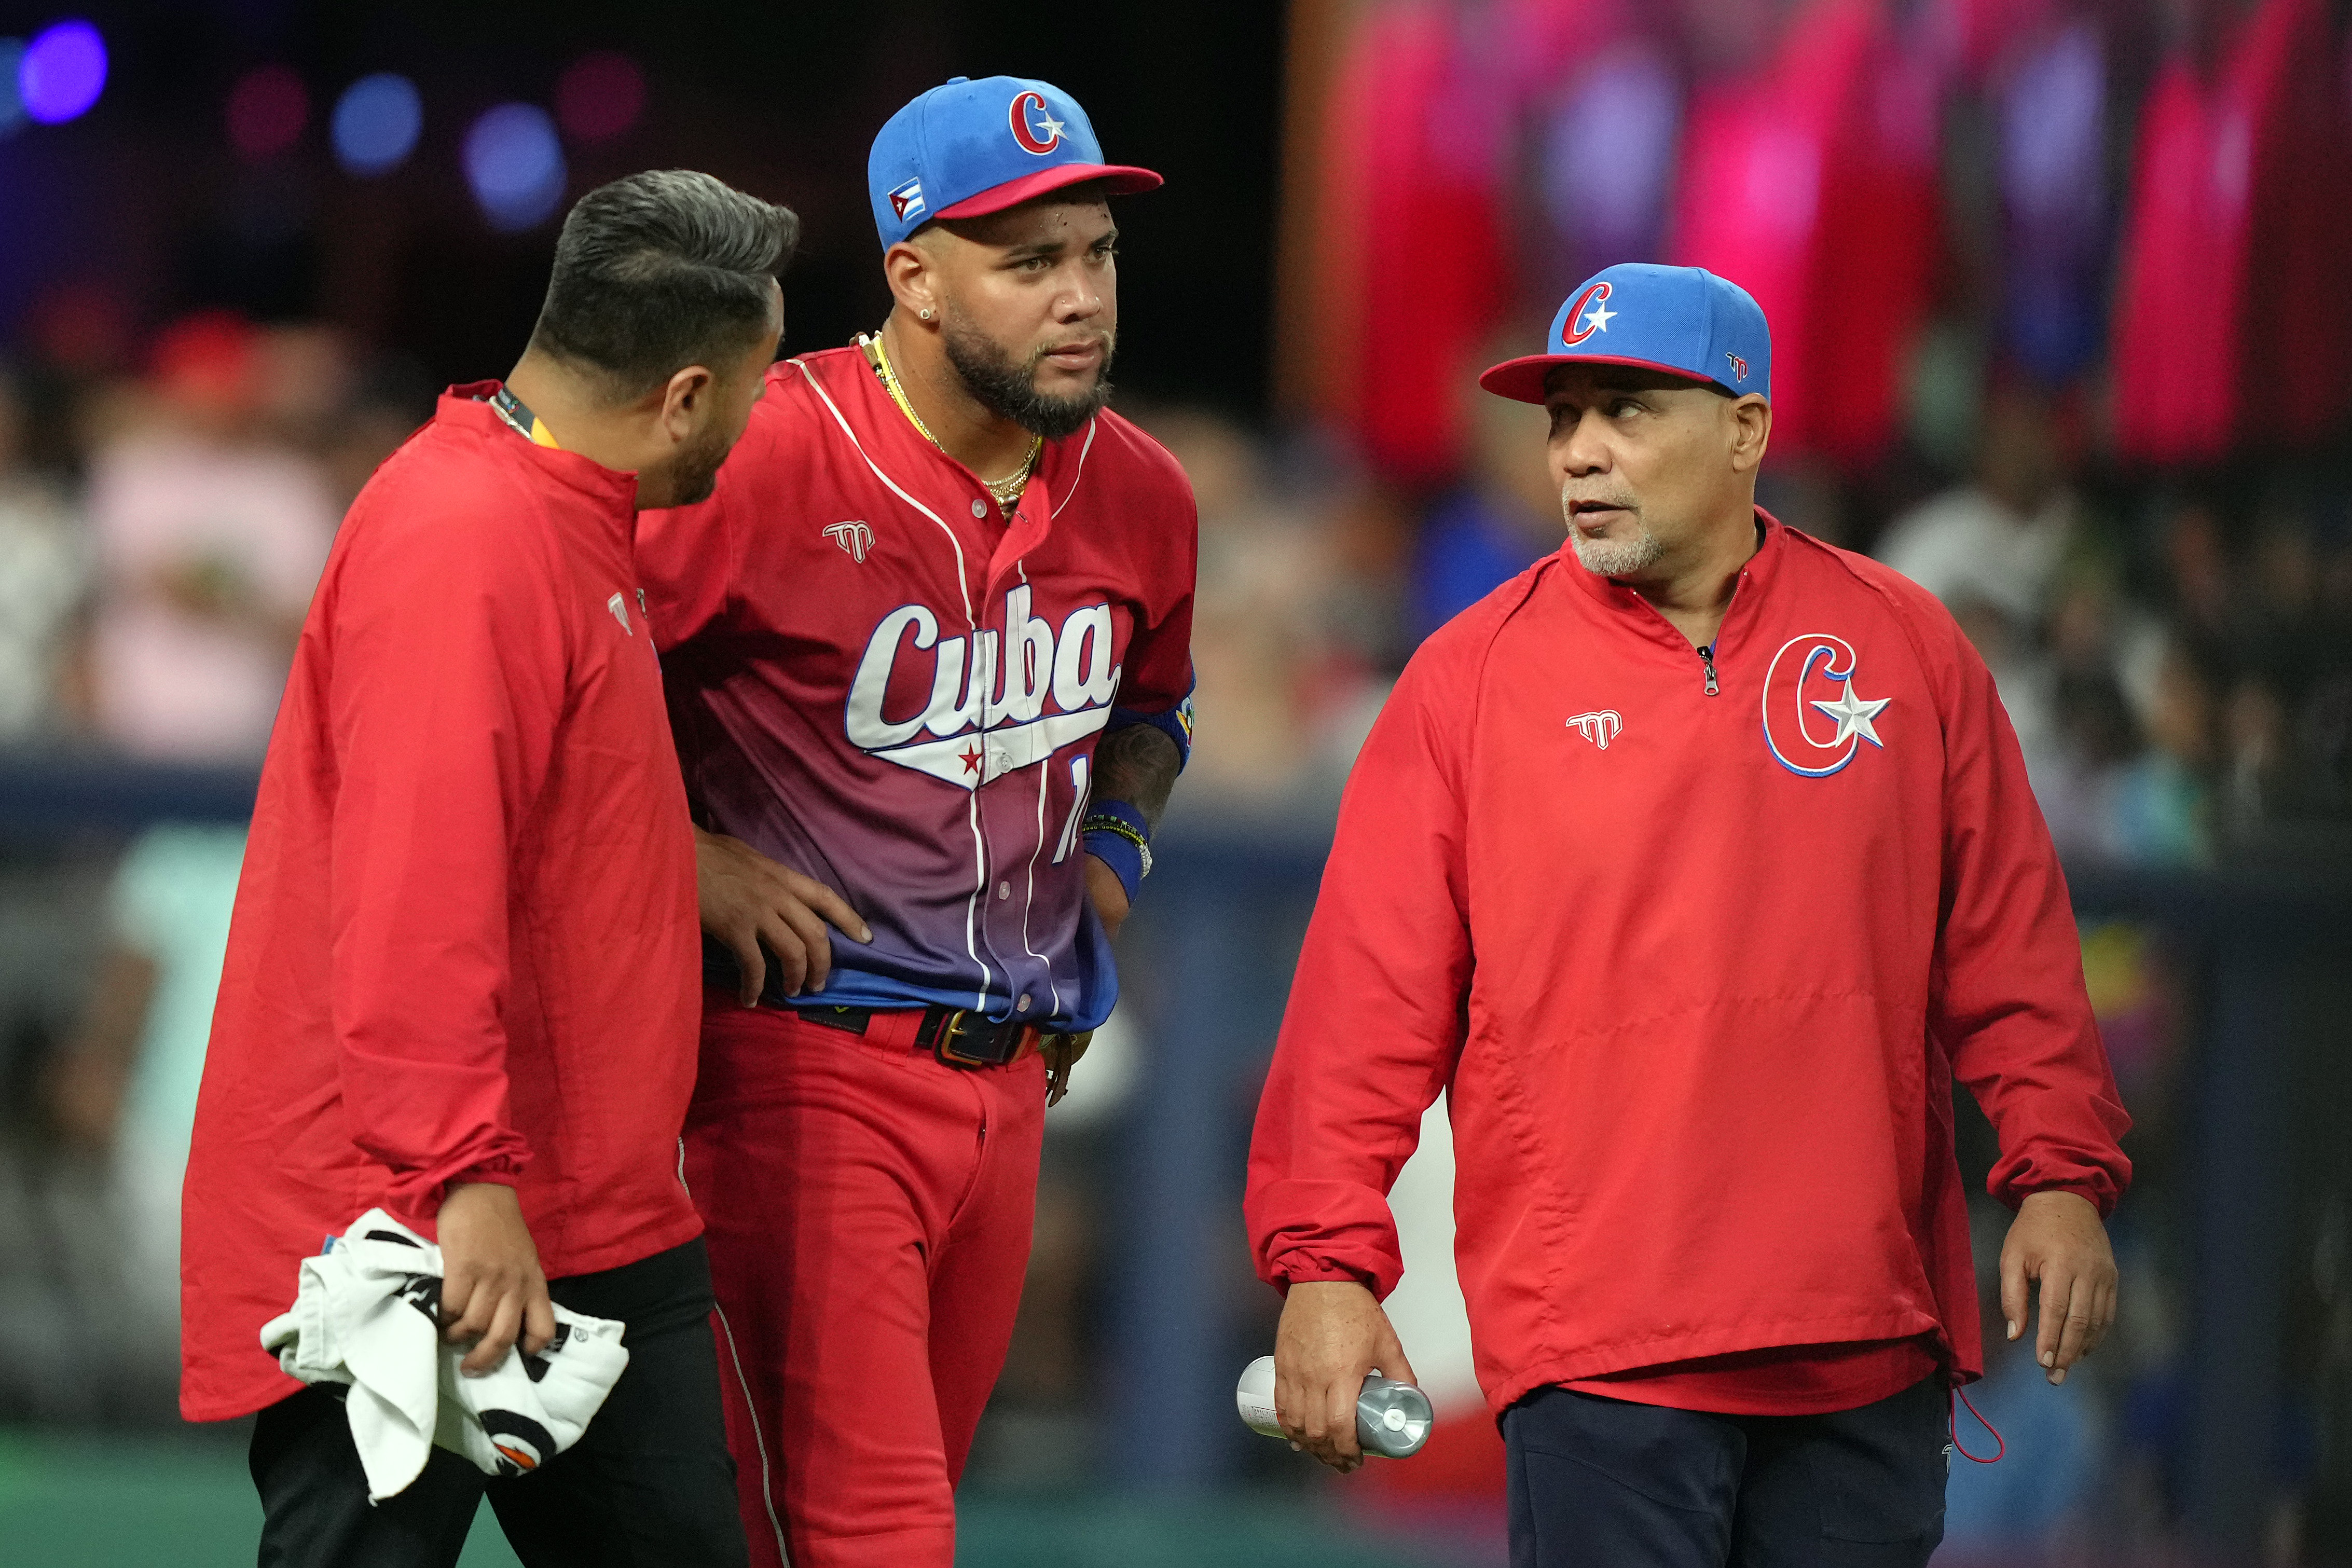 Yoan Moncada #10 of Team Cuba receives medical attention after colliding while trying to make a catch in the sixth inning against Team USA during the World Baseball Classic Semifinals at loanDepot park on March 19, 2023 in Miami, Florida.